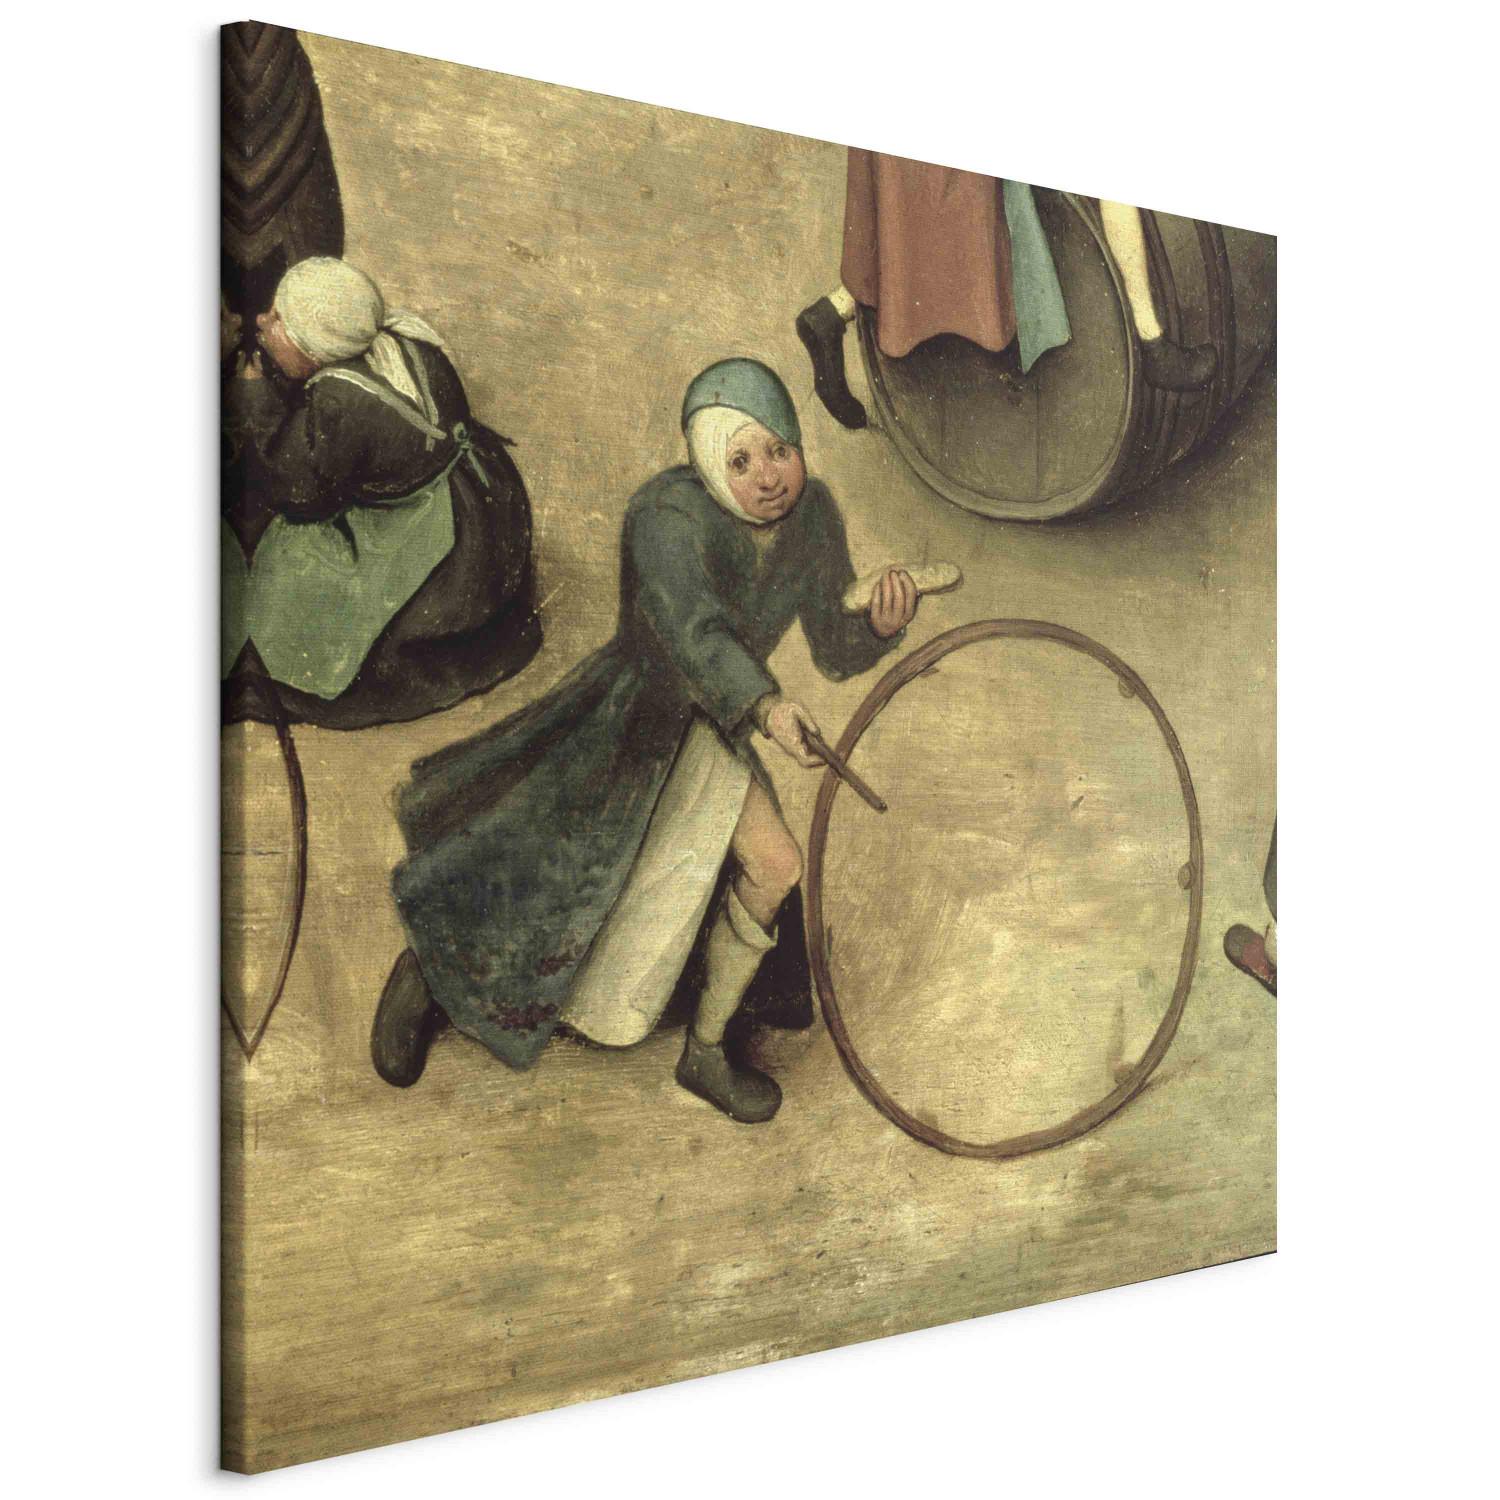 Reproducción Children's Games (Kinderspiele): detail of a child with a stick and hoop